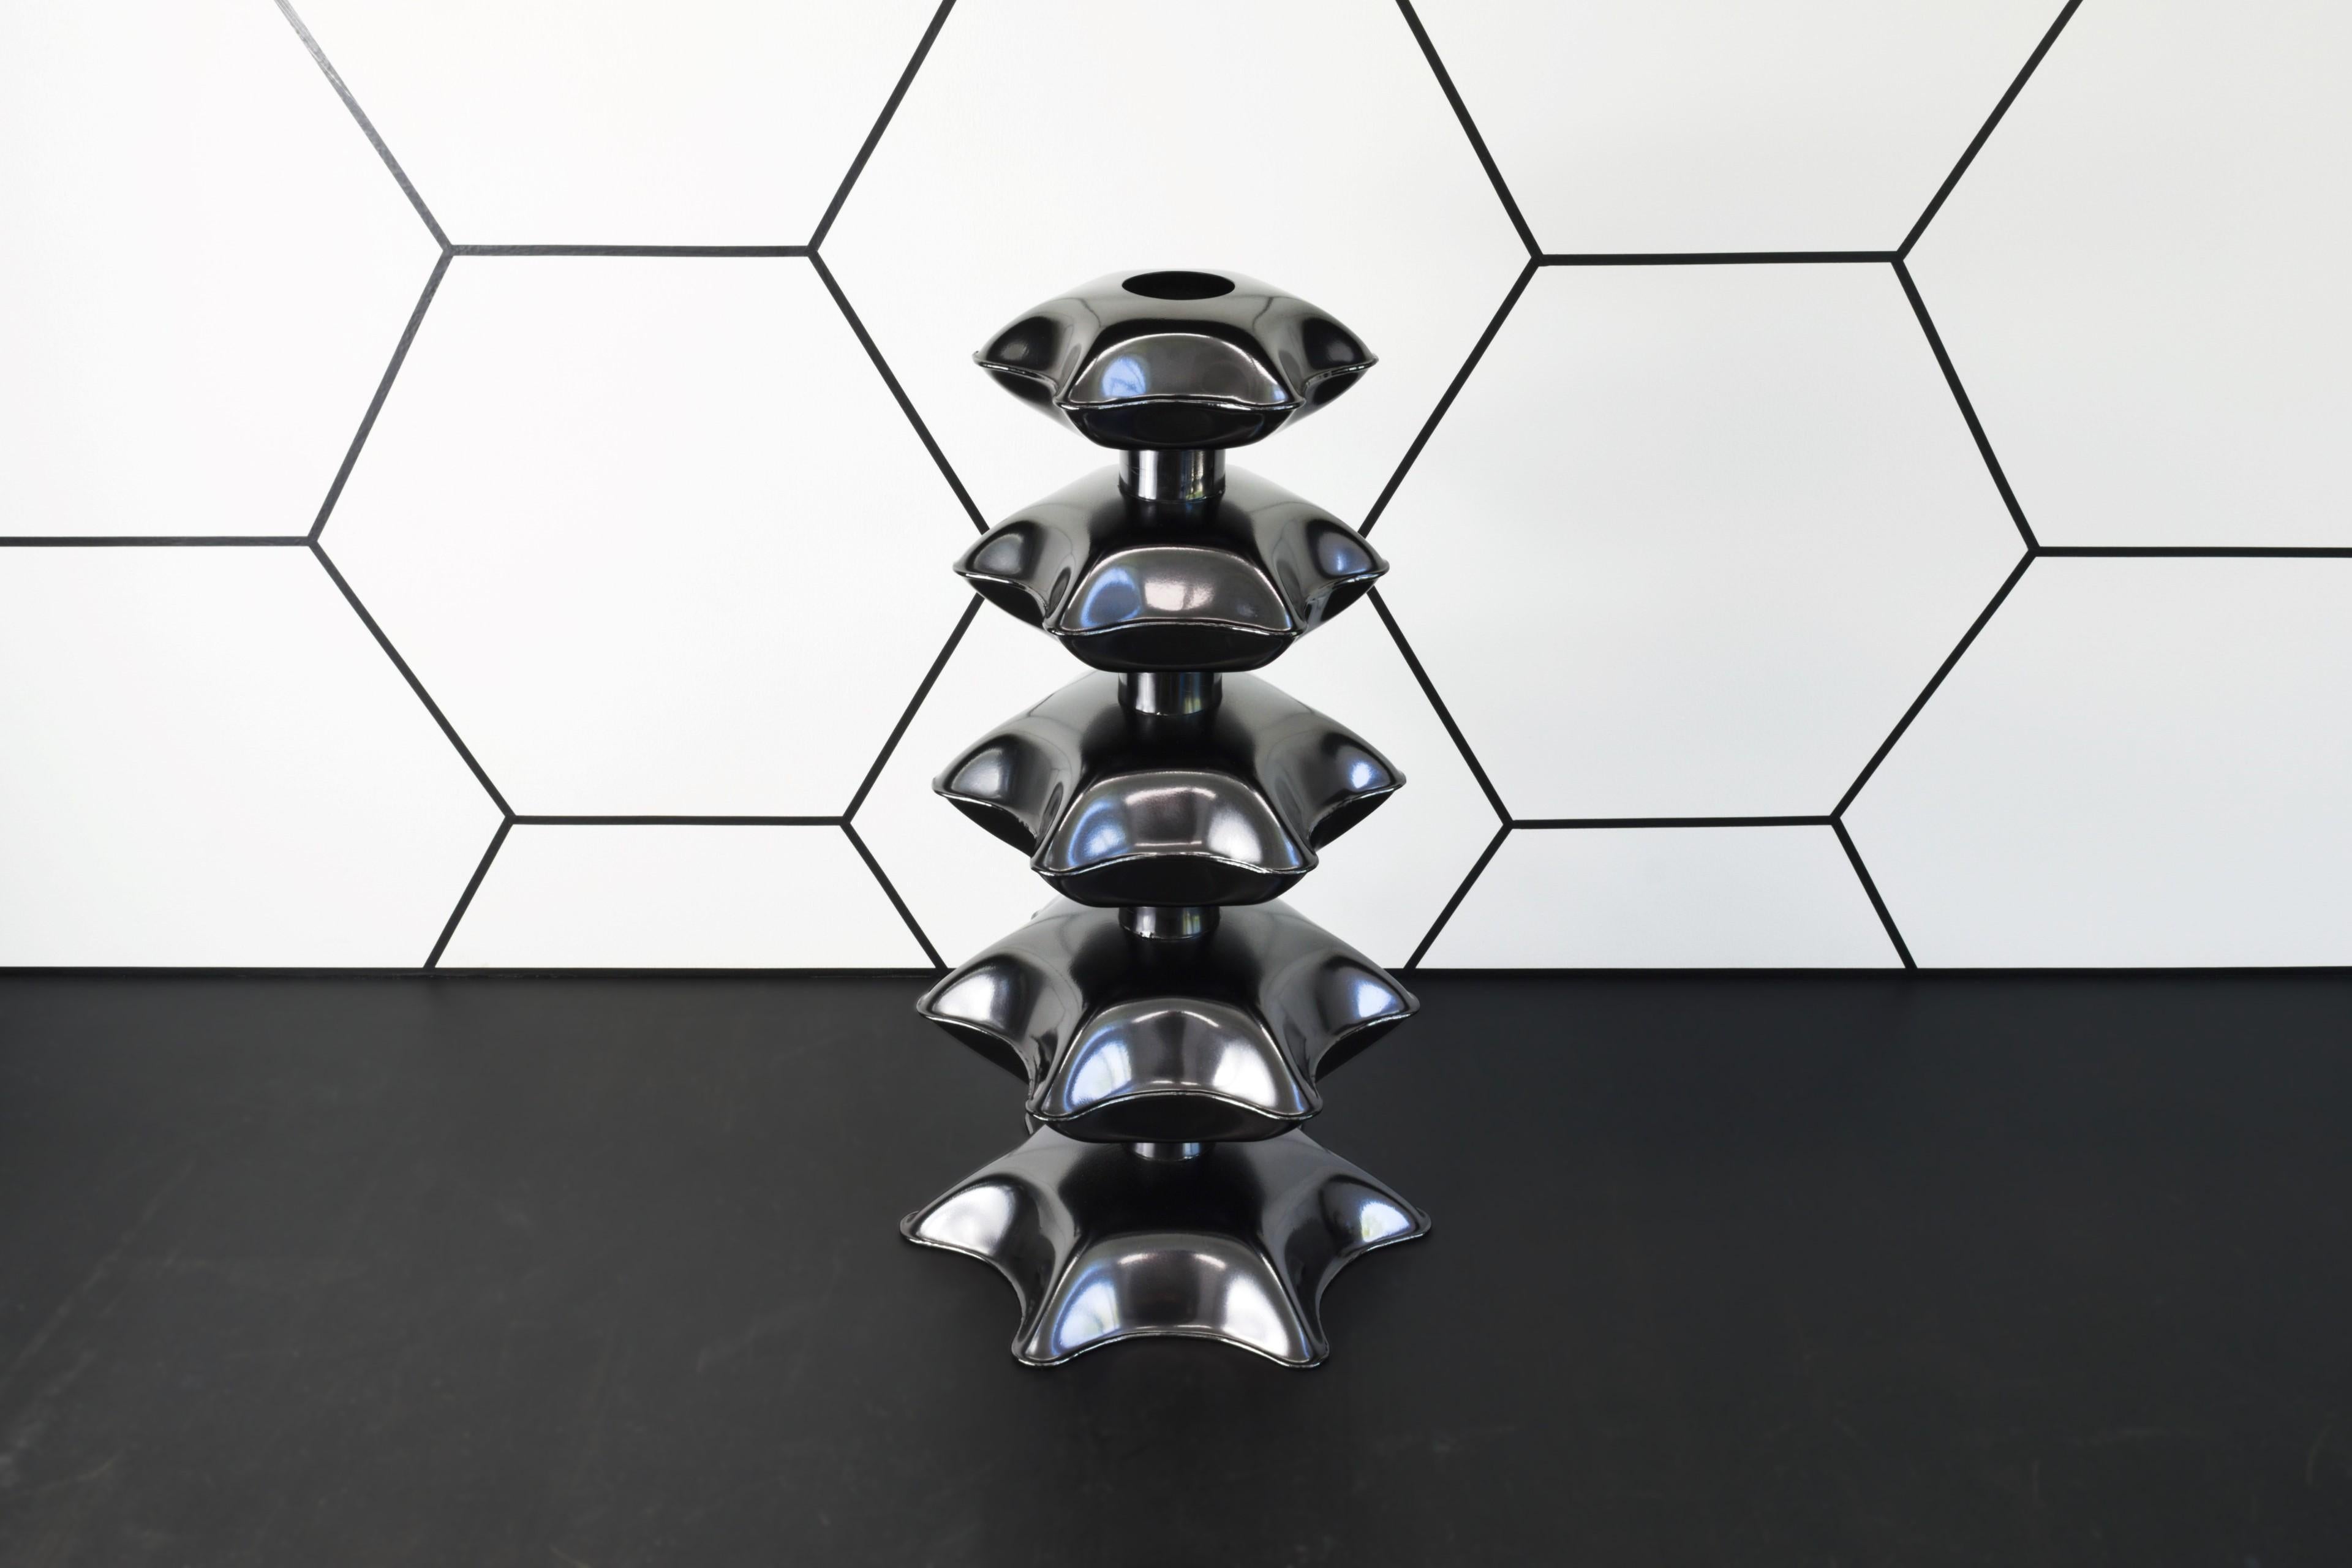 Reminiscent of architecture from the far east, the Pagoda vase developed from experiments with inflating steel, and an ongoing desire to discover exciting new forms with the process.

To create the piece, pairs of flat hexagonal sheets are welded